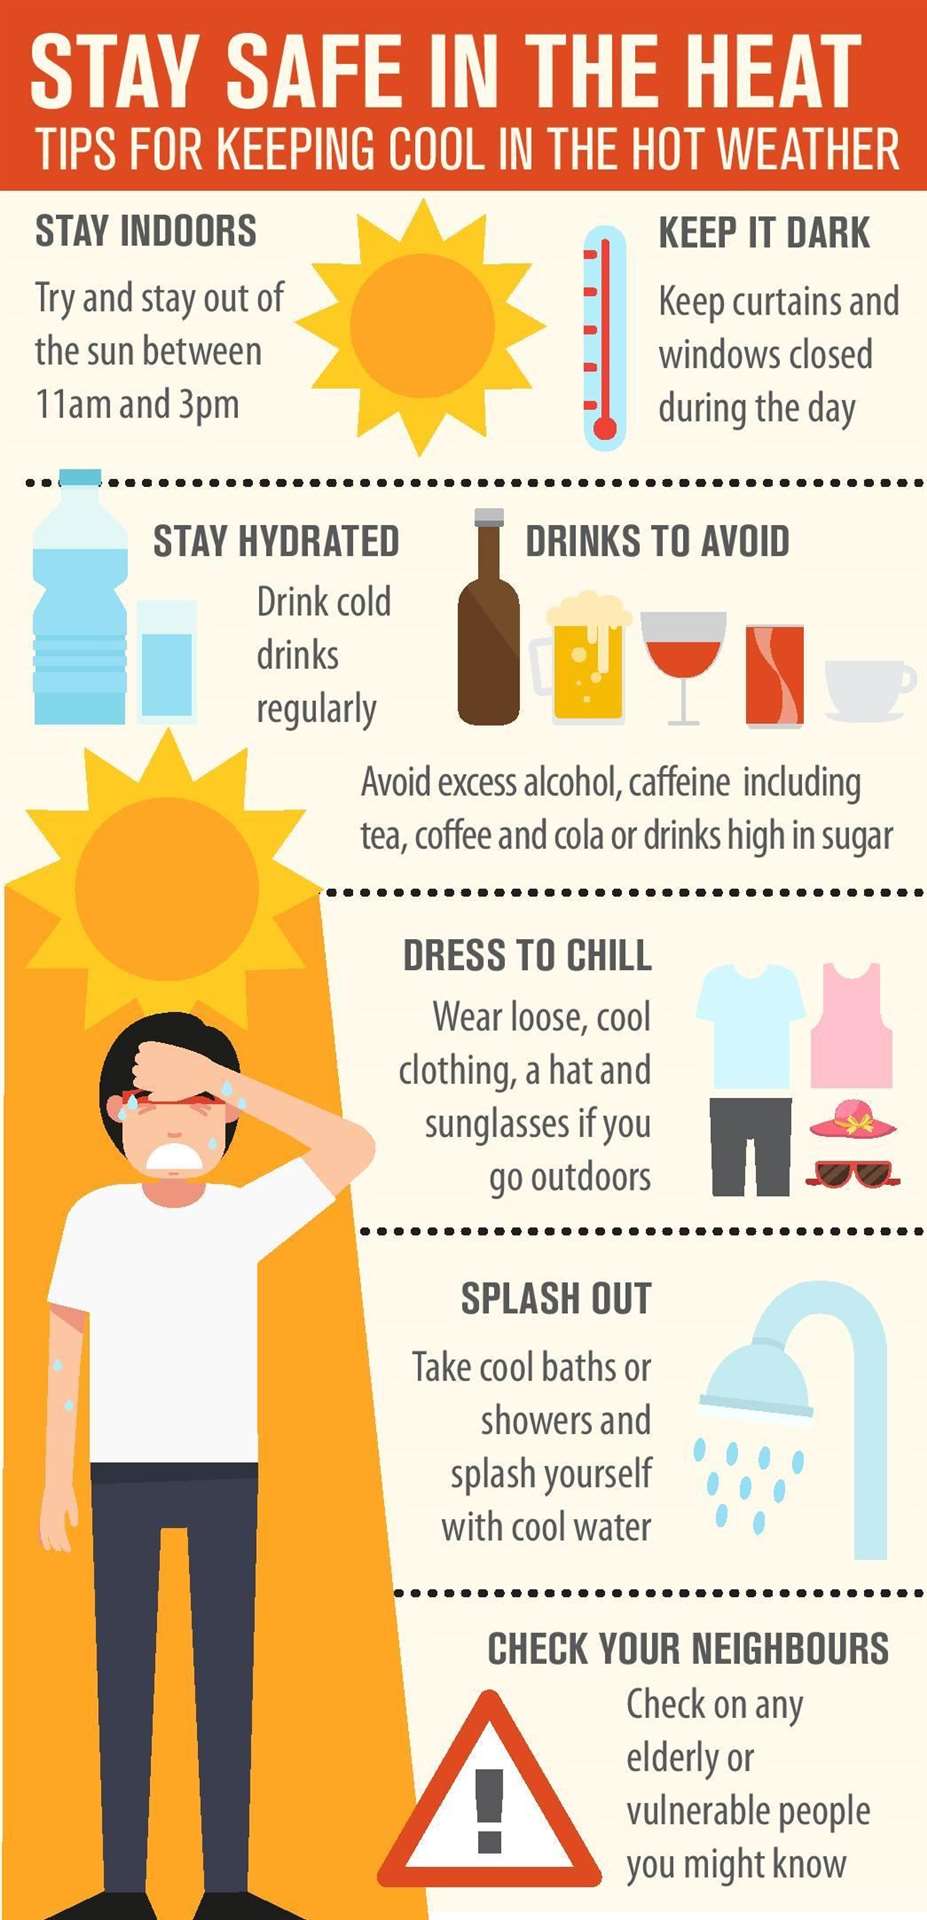 Tips for staying cool during the hot weather